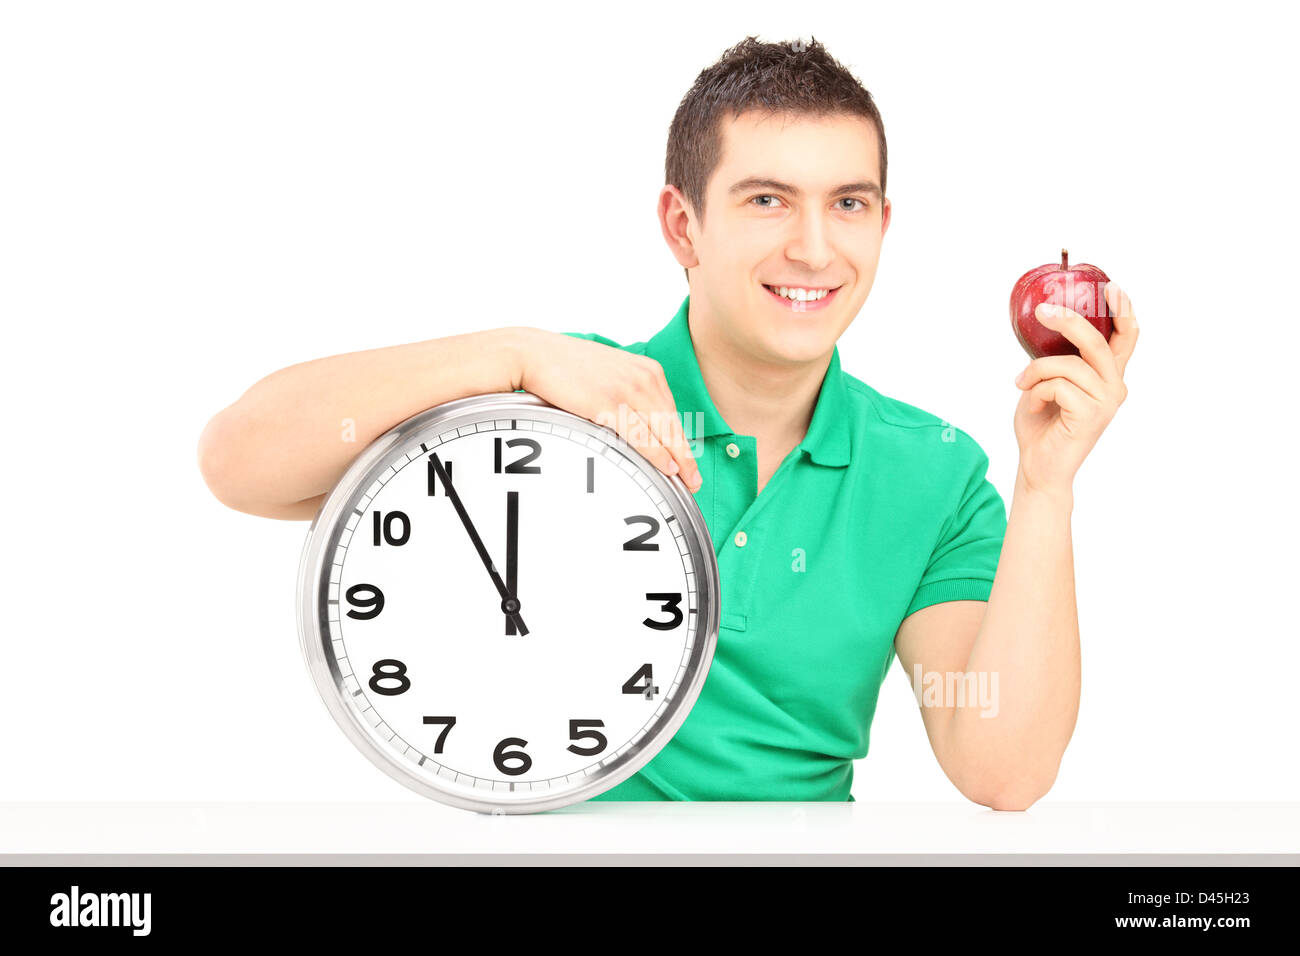 Young man holding wall clock and red apple on a table isolated on white background Stock Photo